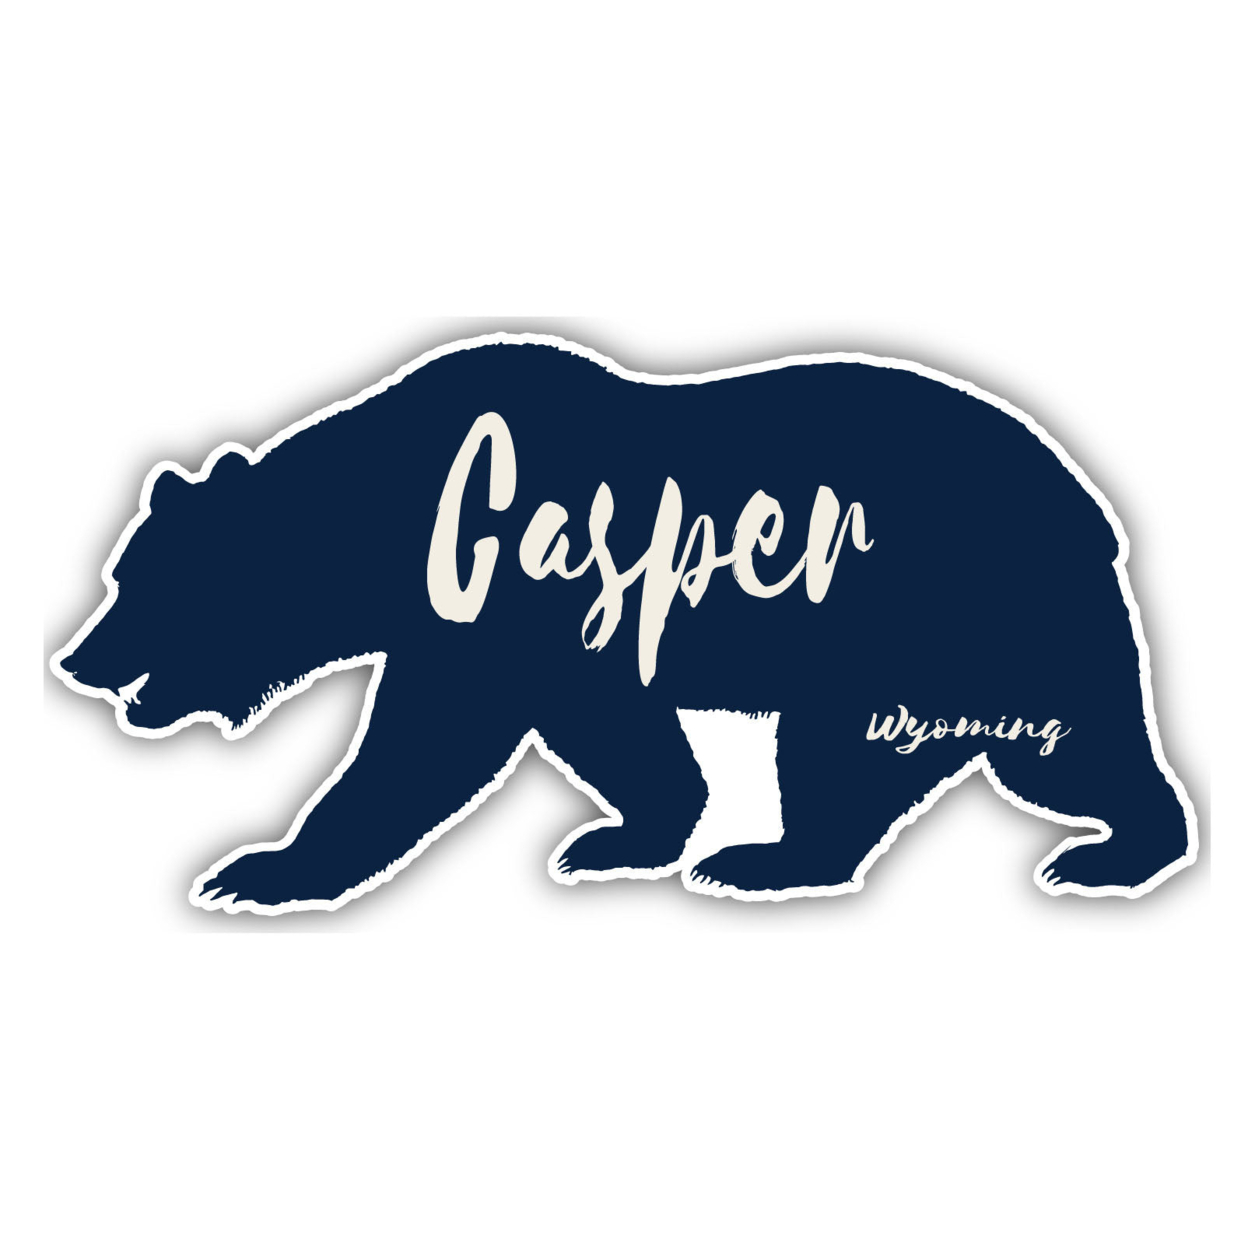 Casper Wyoming Souvenir Decorative Stickers (Choose Theme And Size) - 4-Pack, 4-Inch, Bear